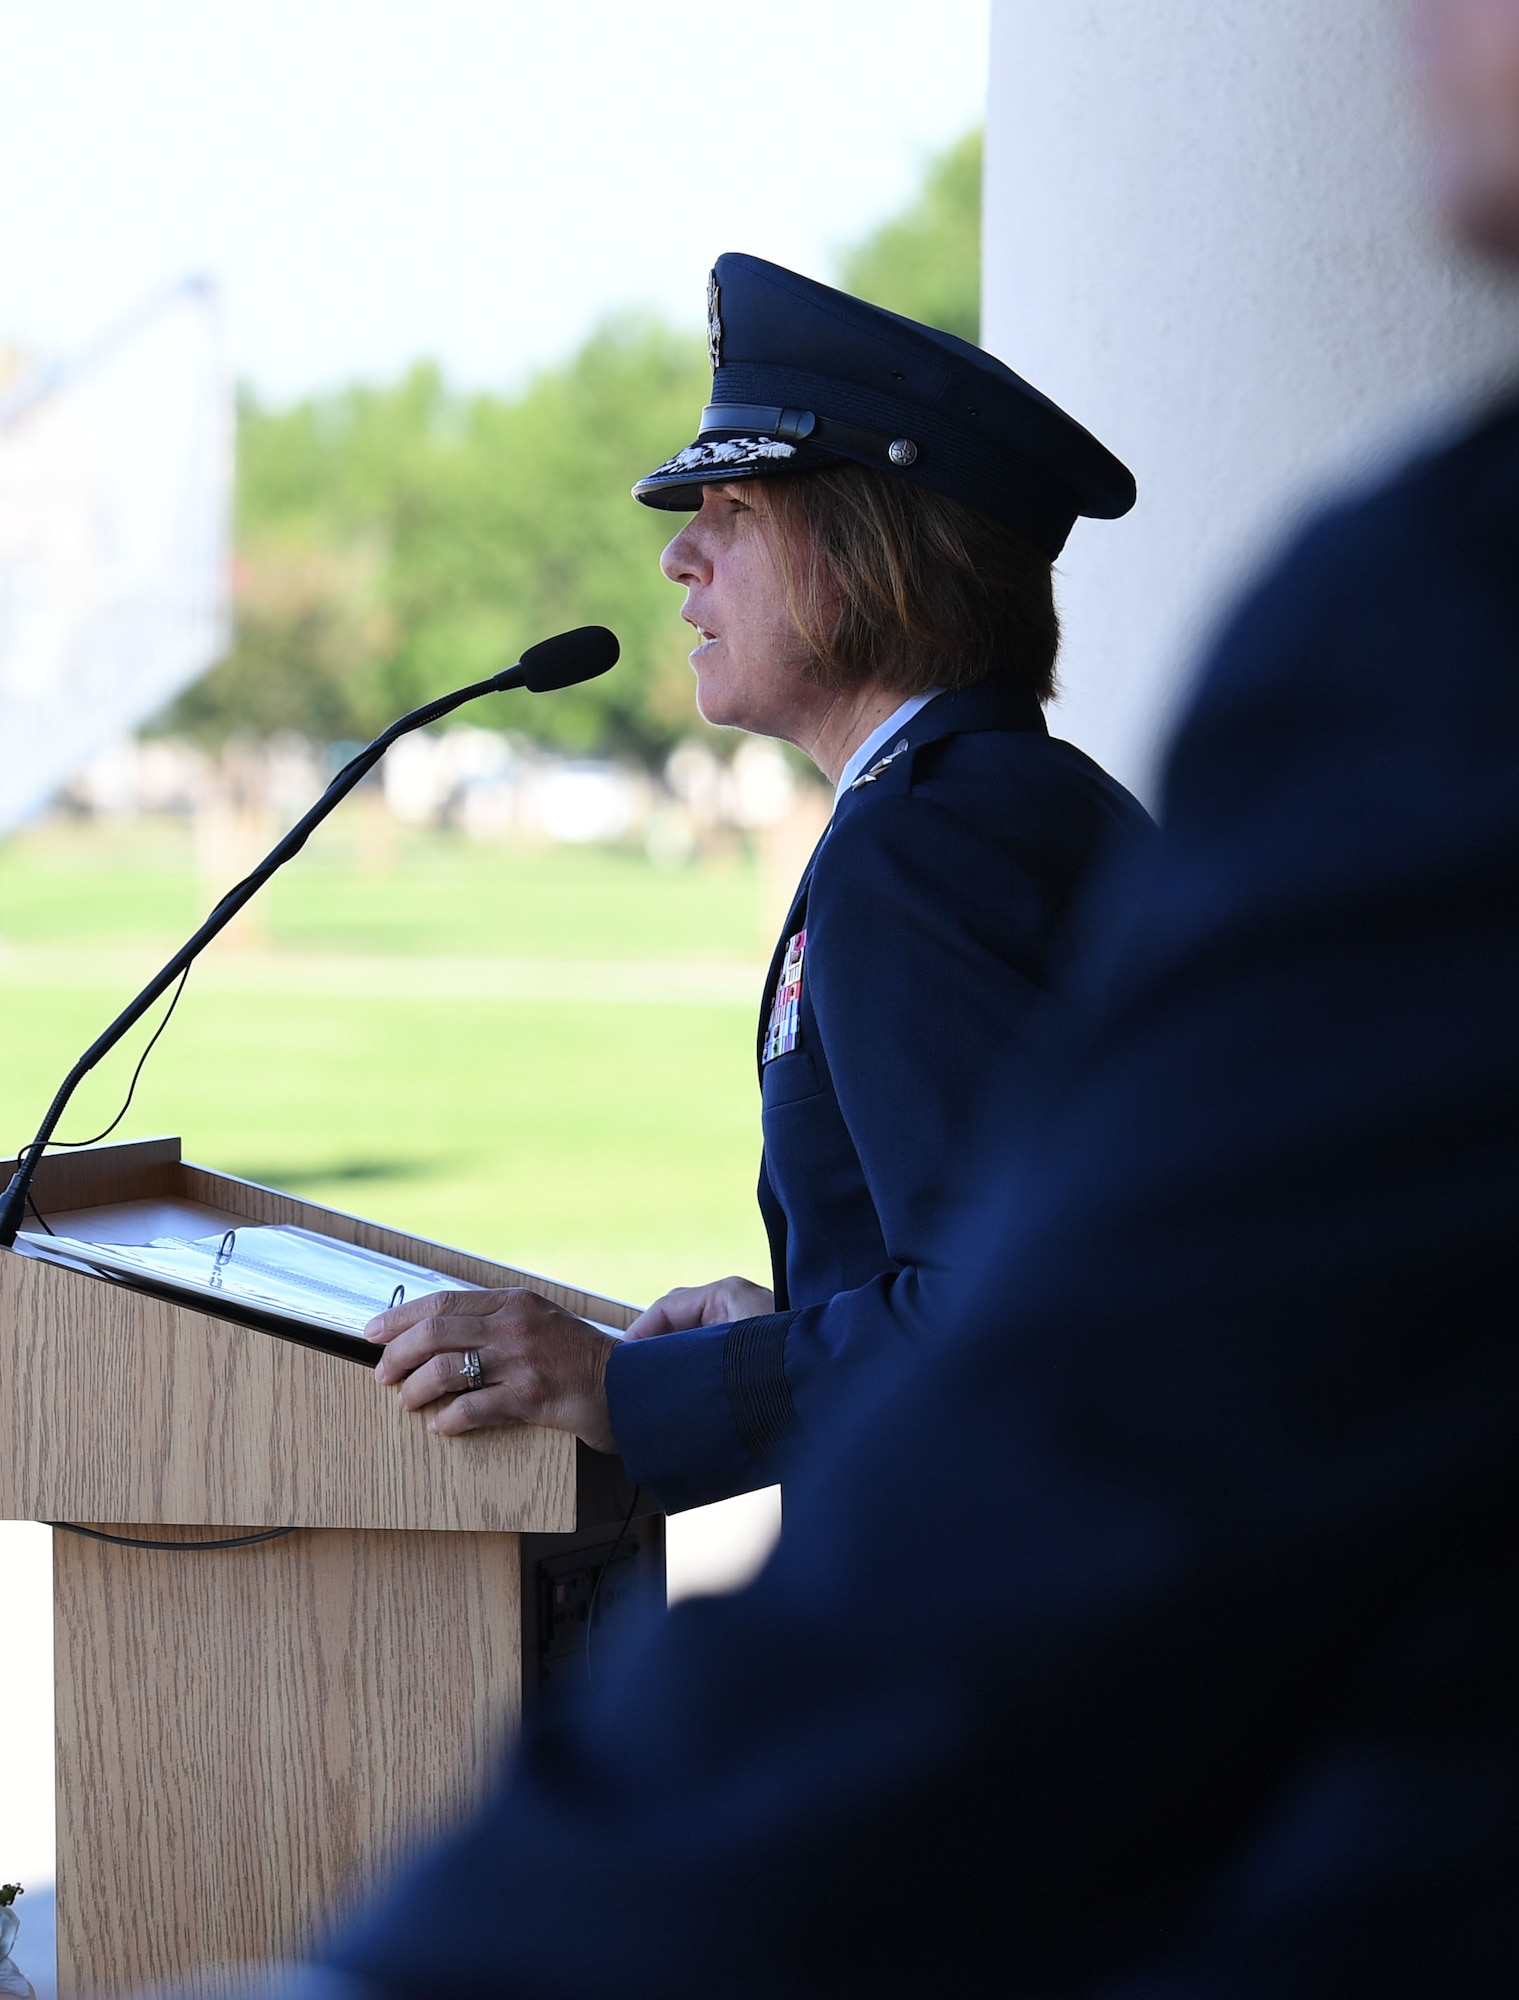 U.S. Air Force Maj. Gen. Andrea Tullos, Second Air Force commander, delivers remarks during the 81st Training Wing change of command ceremony on the Levitow Training Support Facility drill pad at Keesler Air Force Base, Mississippi, June 17, 2021. Col. Heather Blackwell relinquished command of the 81st TRW to Col. William Hunter. (U.S. Air Force photo by Kemberly Groue)